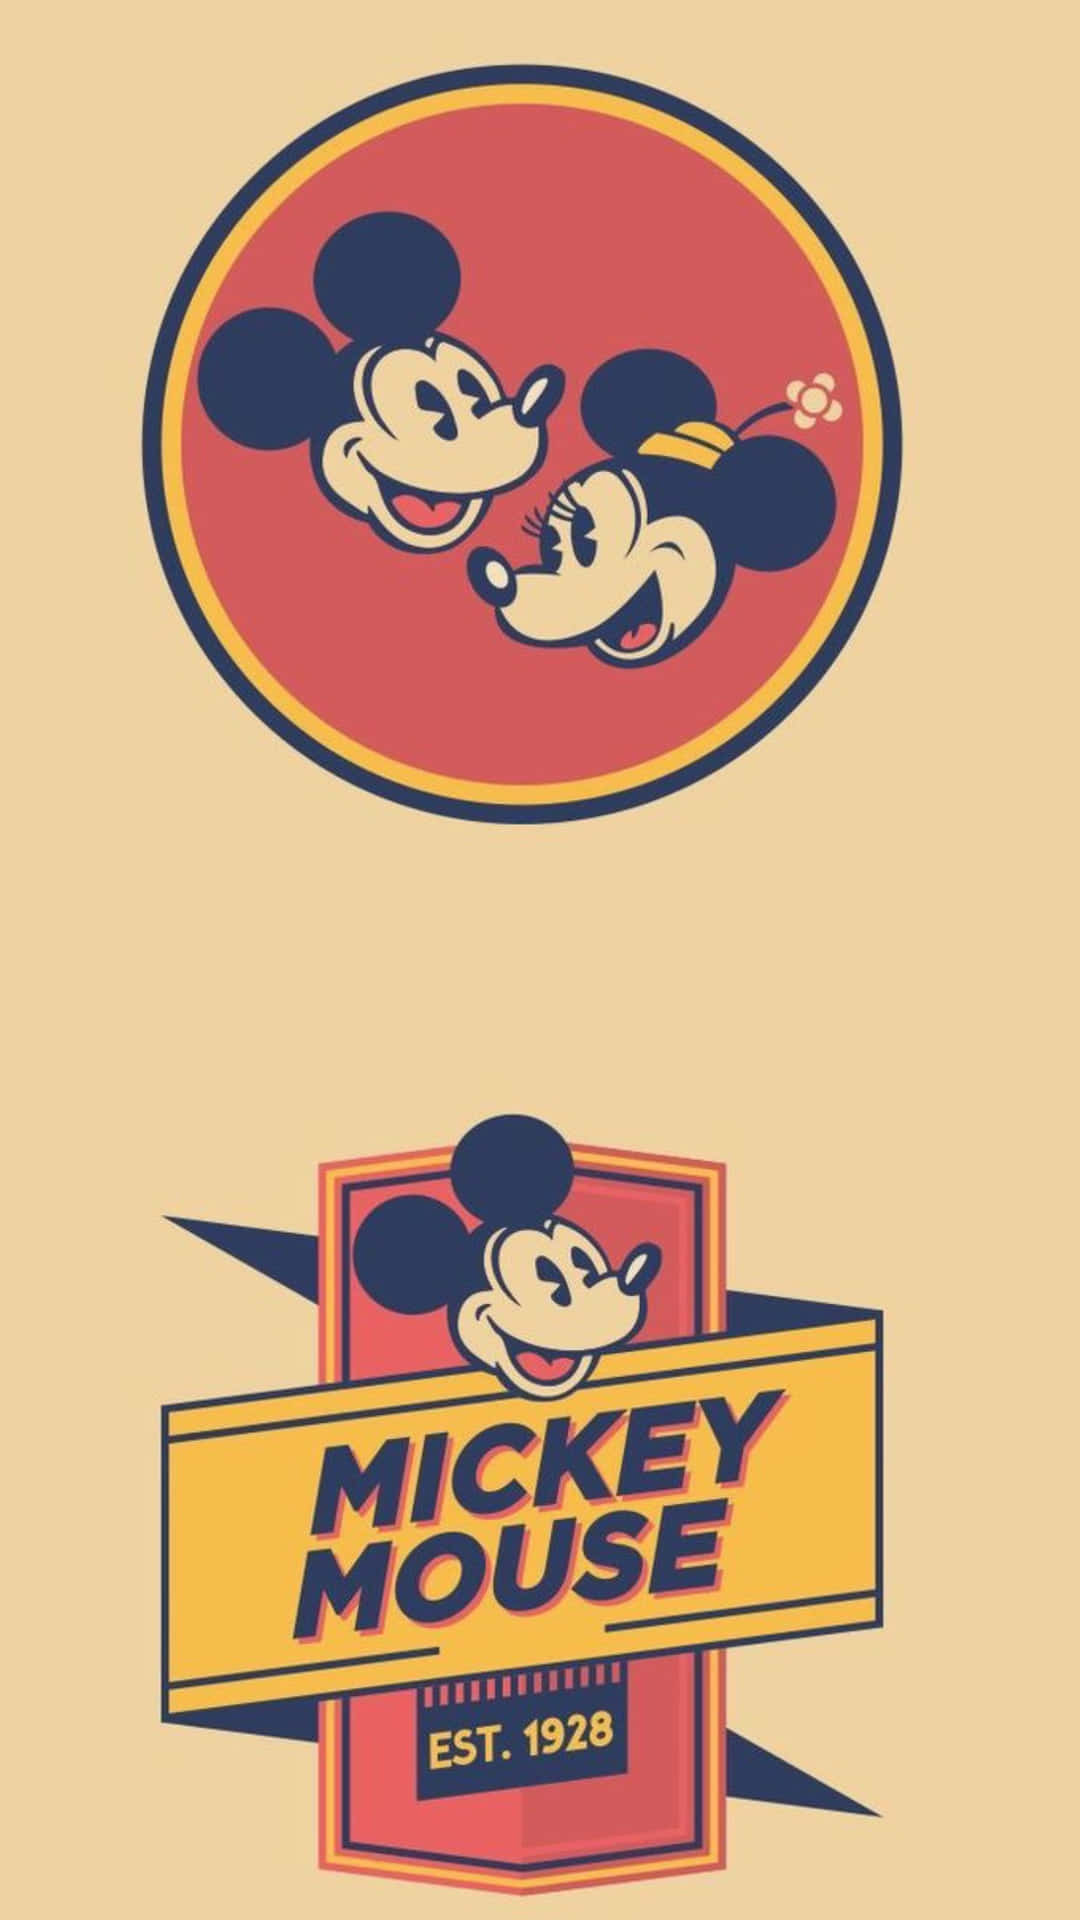 Vintage Mickey Mouse Poster Wallpaper